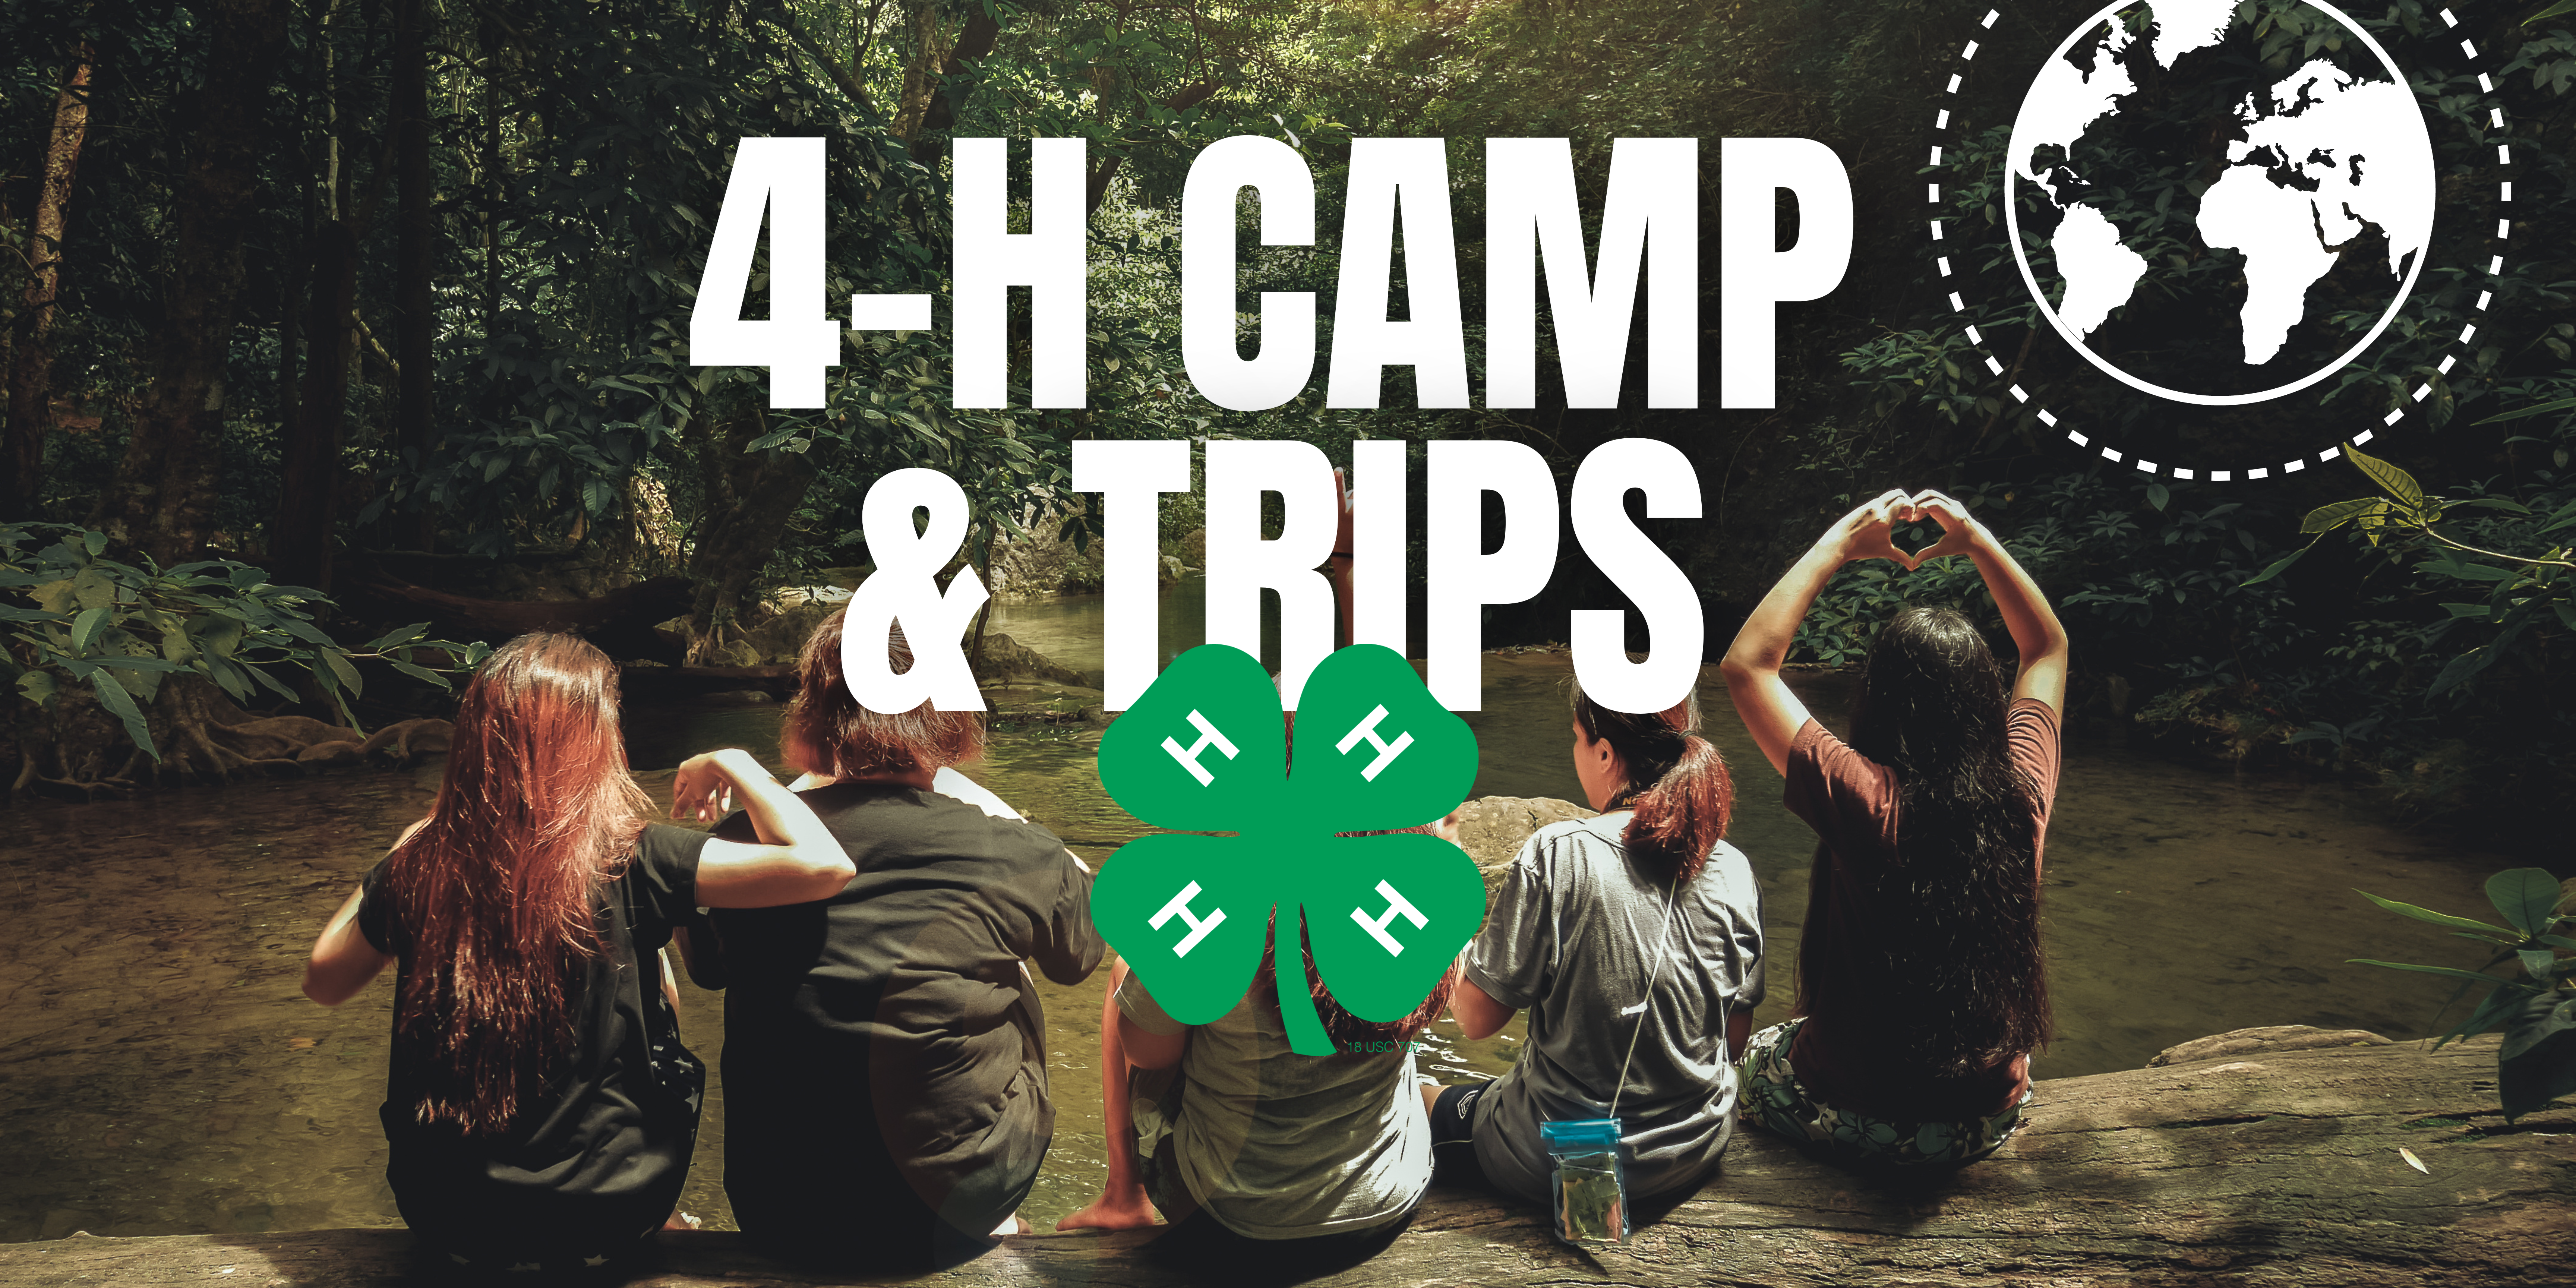 4-H Camp and Trips